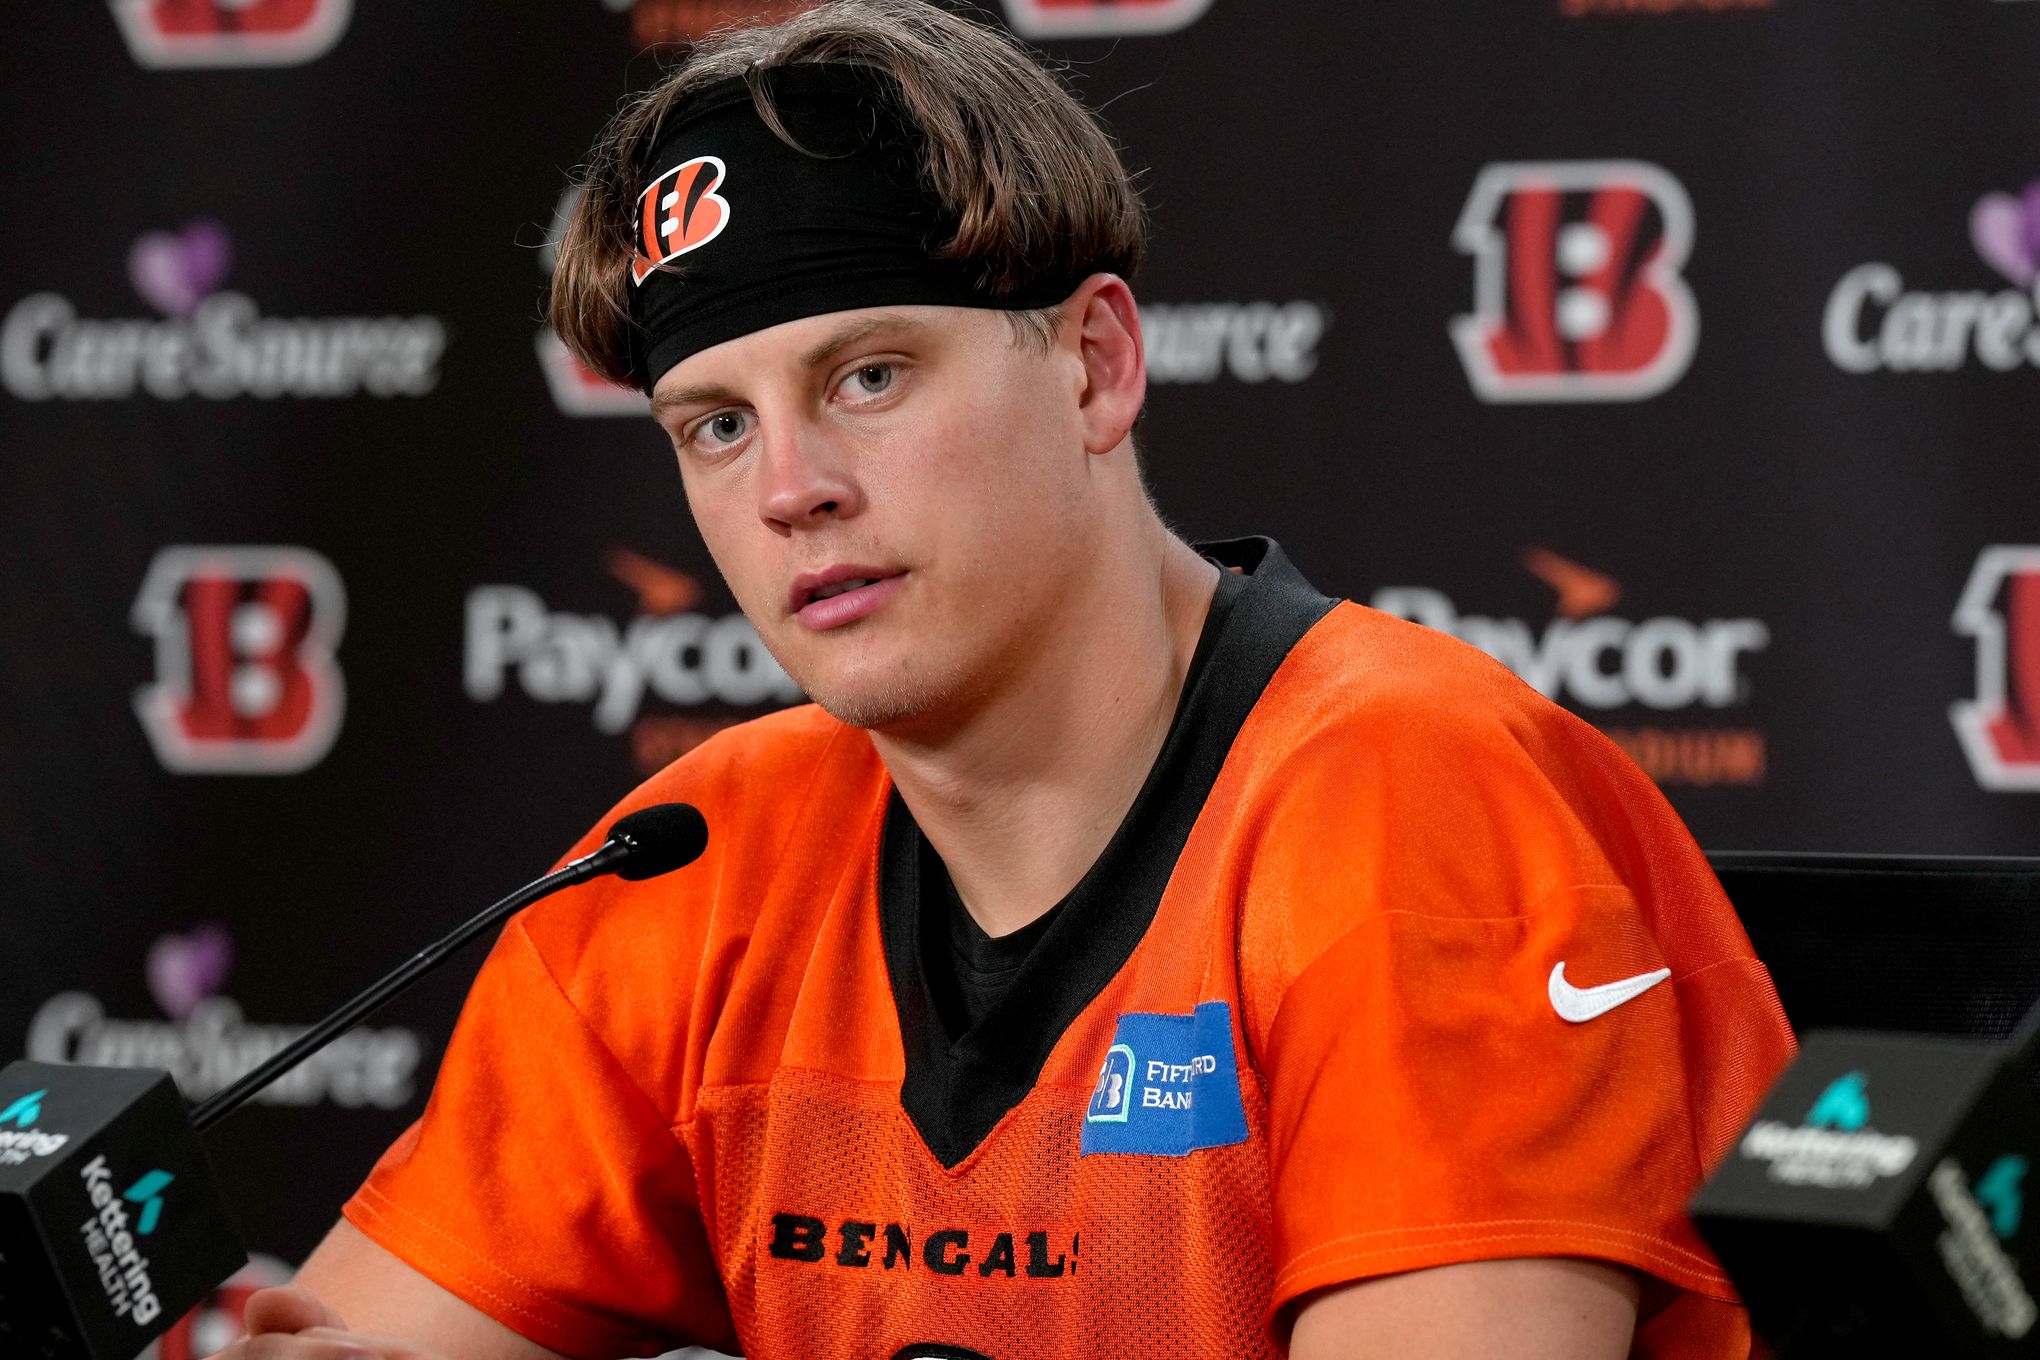 Bengals QB Joe Burrow becomes NFL's highest-paid player with $275 million  deal, AP source says | The Seattle Times